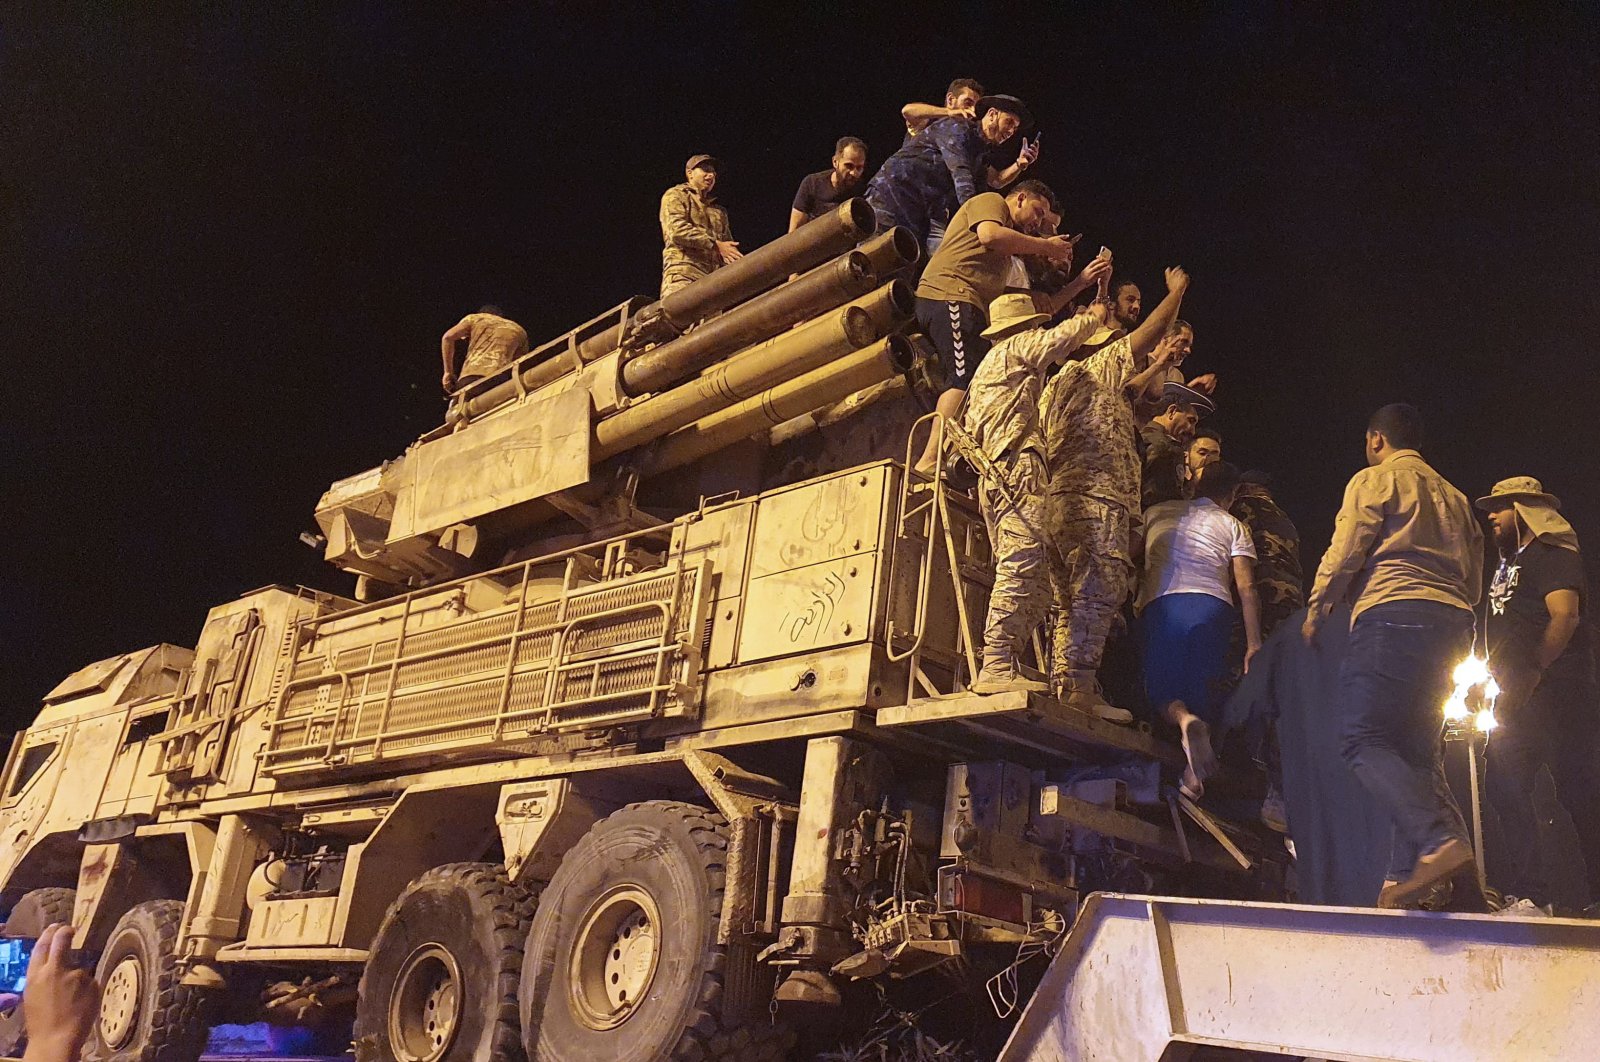 Forces loyal to Libya's U.N.-recognised Government of National Accord (GNA) parade a Pantsir air defense system truck in the capital Tripoli on May 20, 2020, after its capture at al-Watiya airbase (Okba Ibn Nafa airbase) from forces loyal to Libya's eastern-based strongman Khalifa Haftar. (AFP Photo)